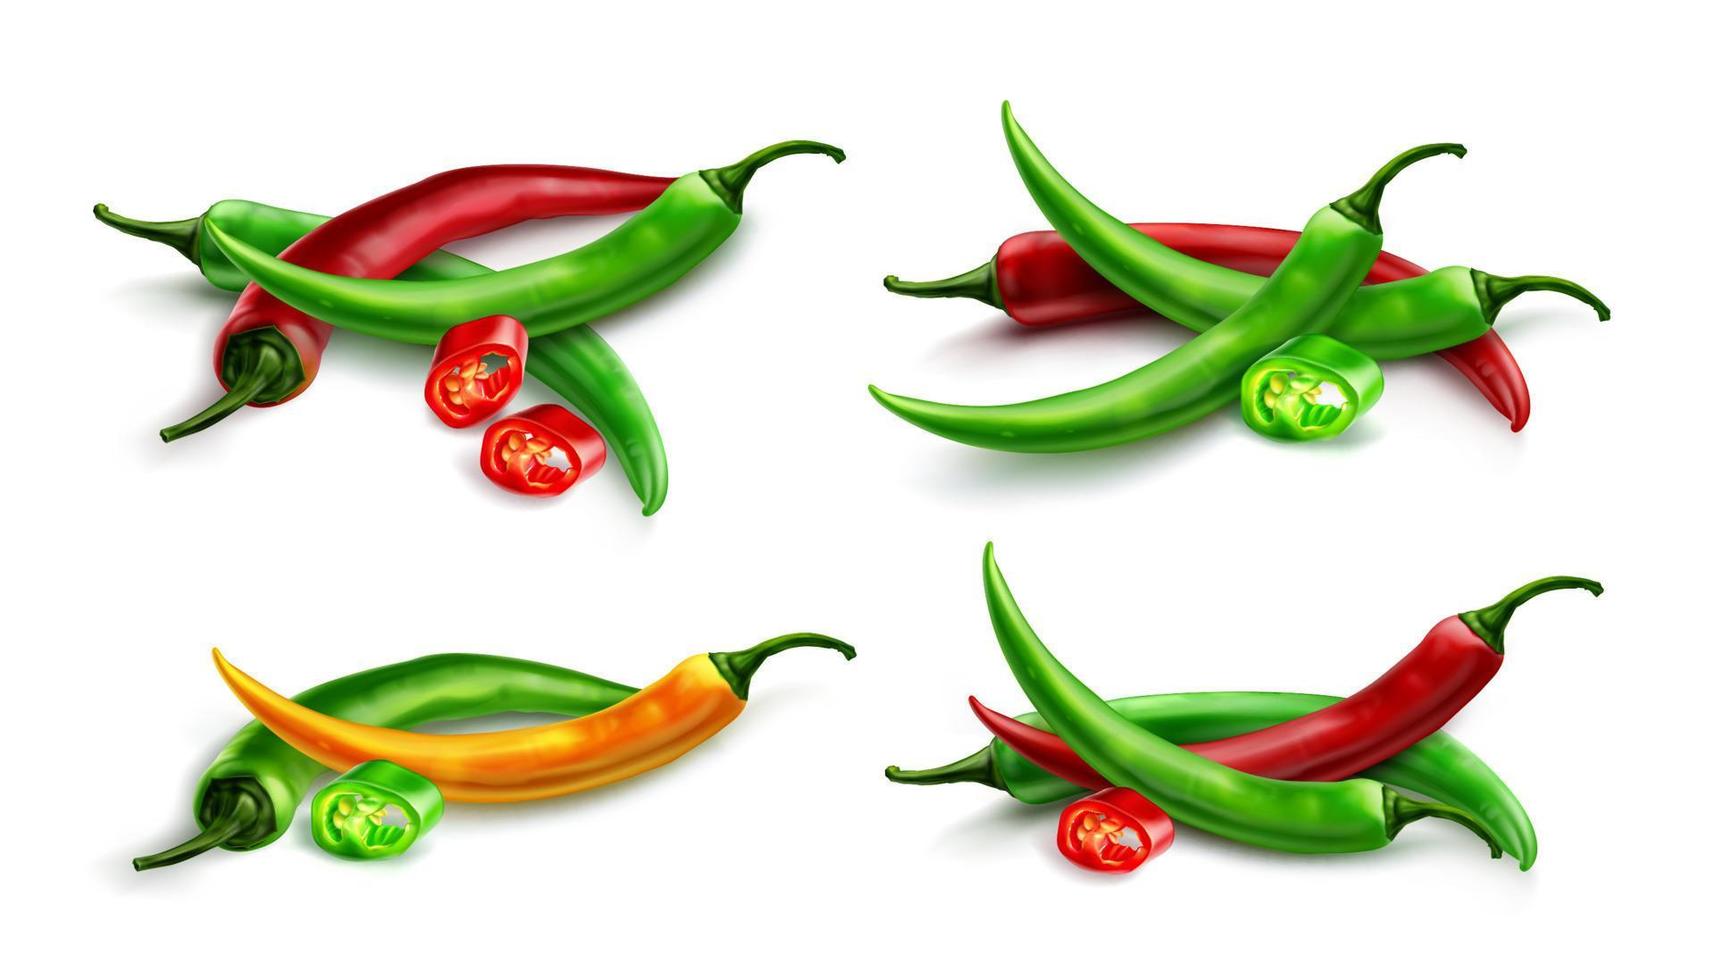 Red chili pepper, hot spicy paprika cayenne vector